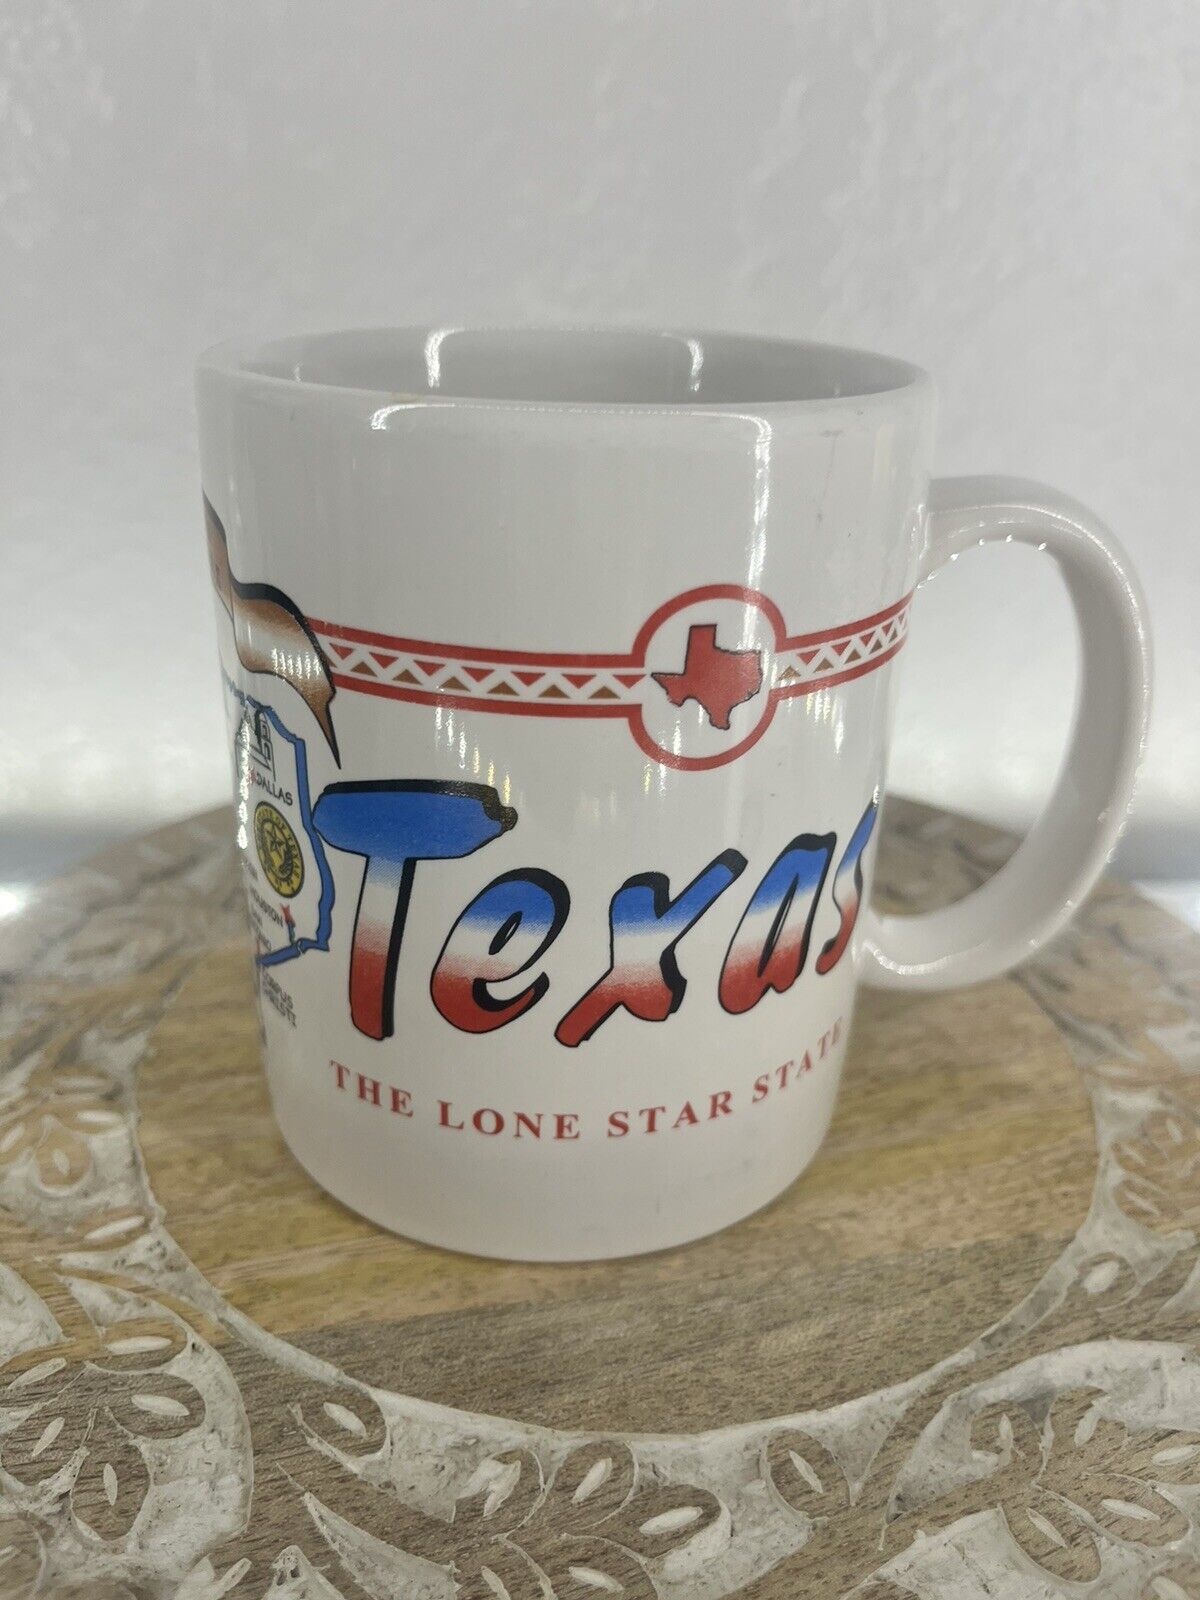 Texas The Lone Star State Facts Souvenir Mug Cup with Map of Texas Major Cities